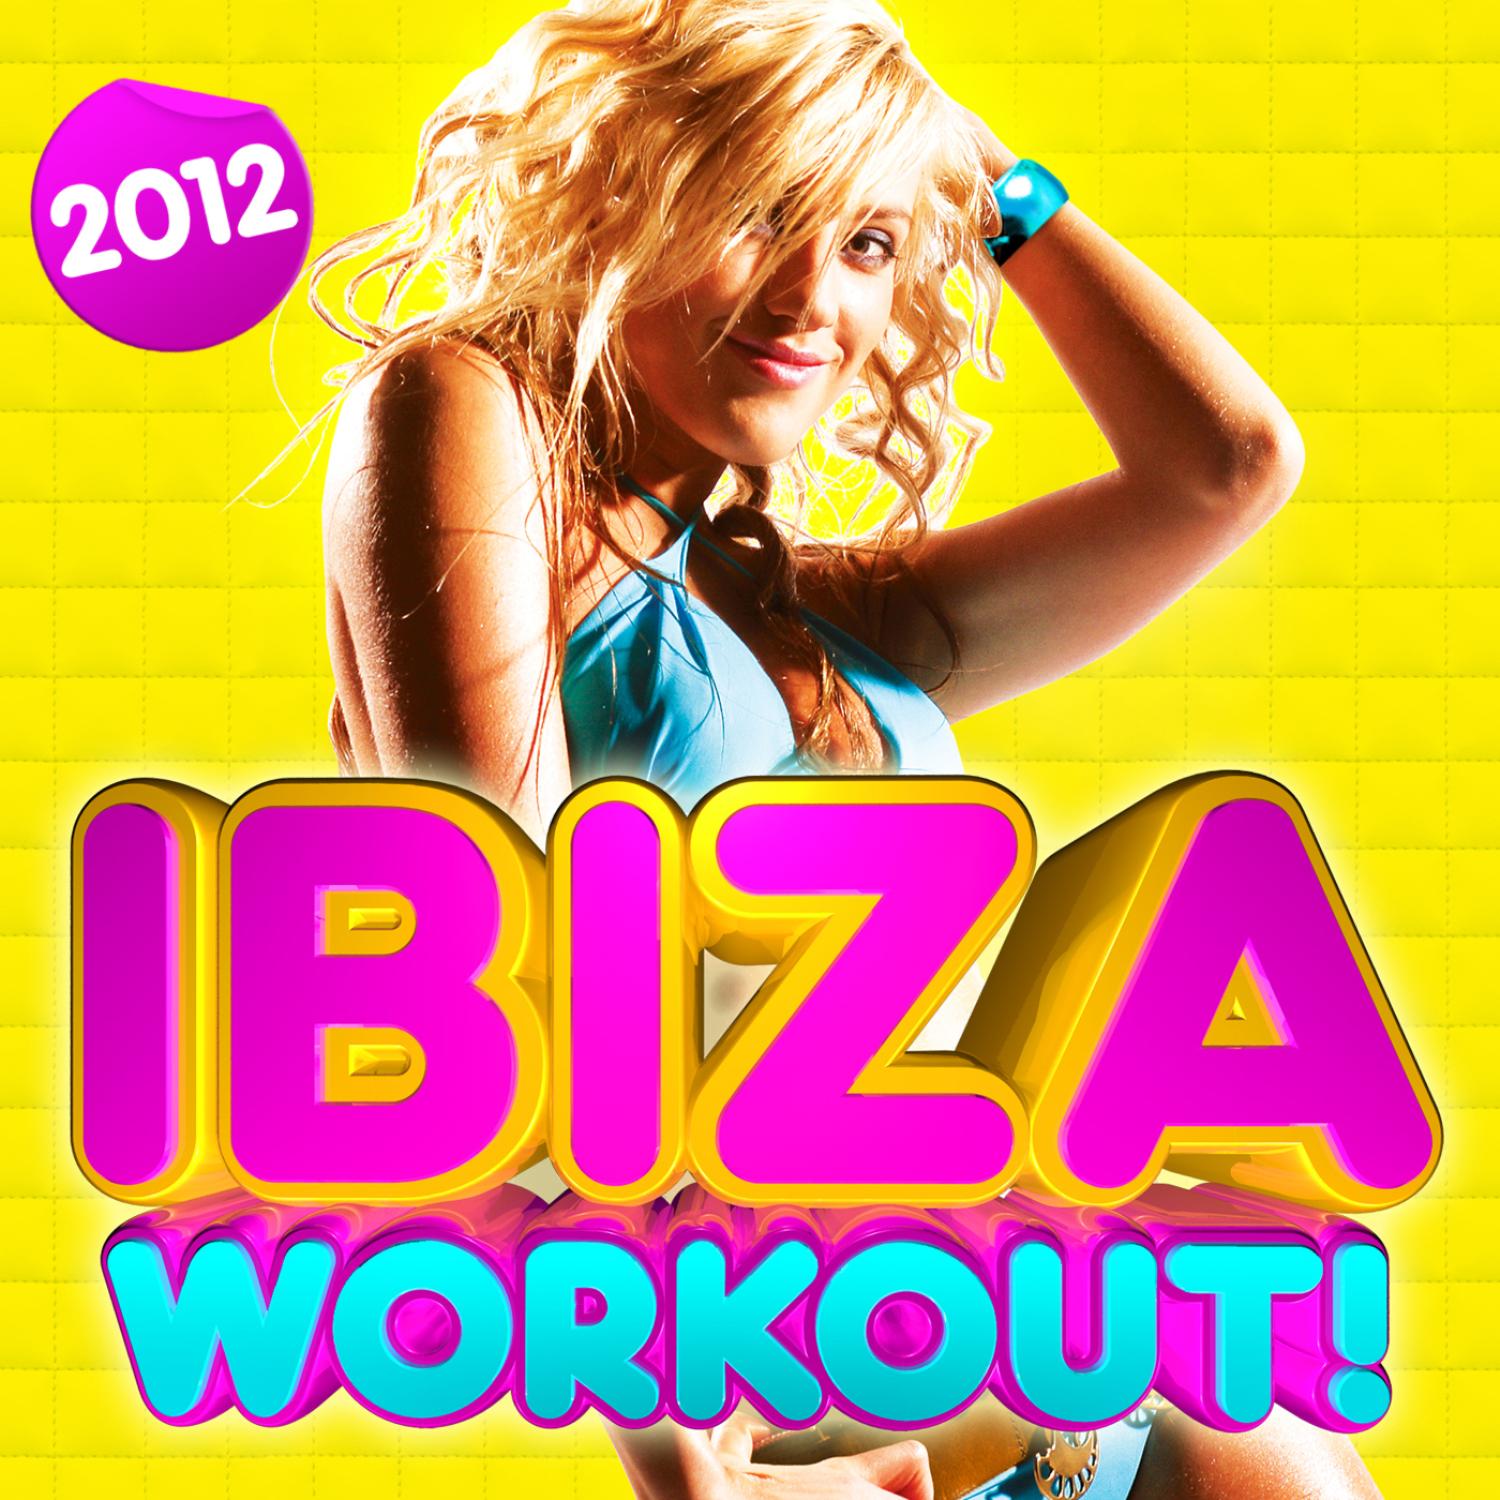 Ibiza Workout 2012 ! - 30 Fitness Dance Hits - dancing, party, body toning, keep fit, exercise, running, aerobics, cardio & abs